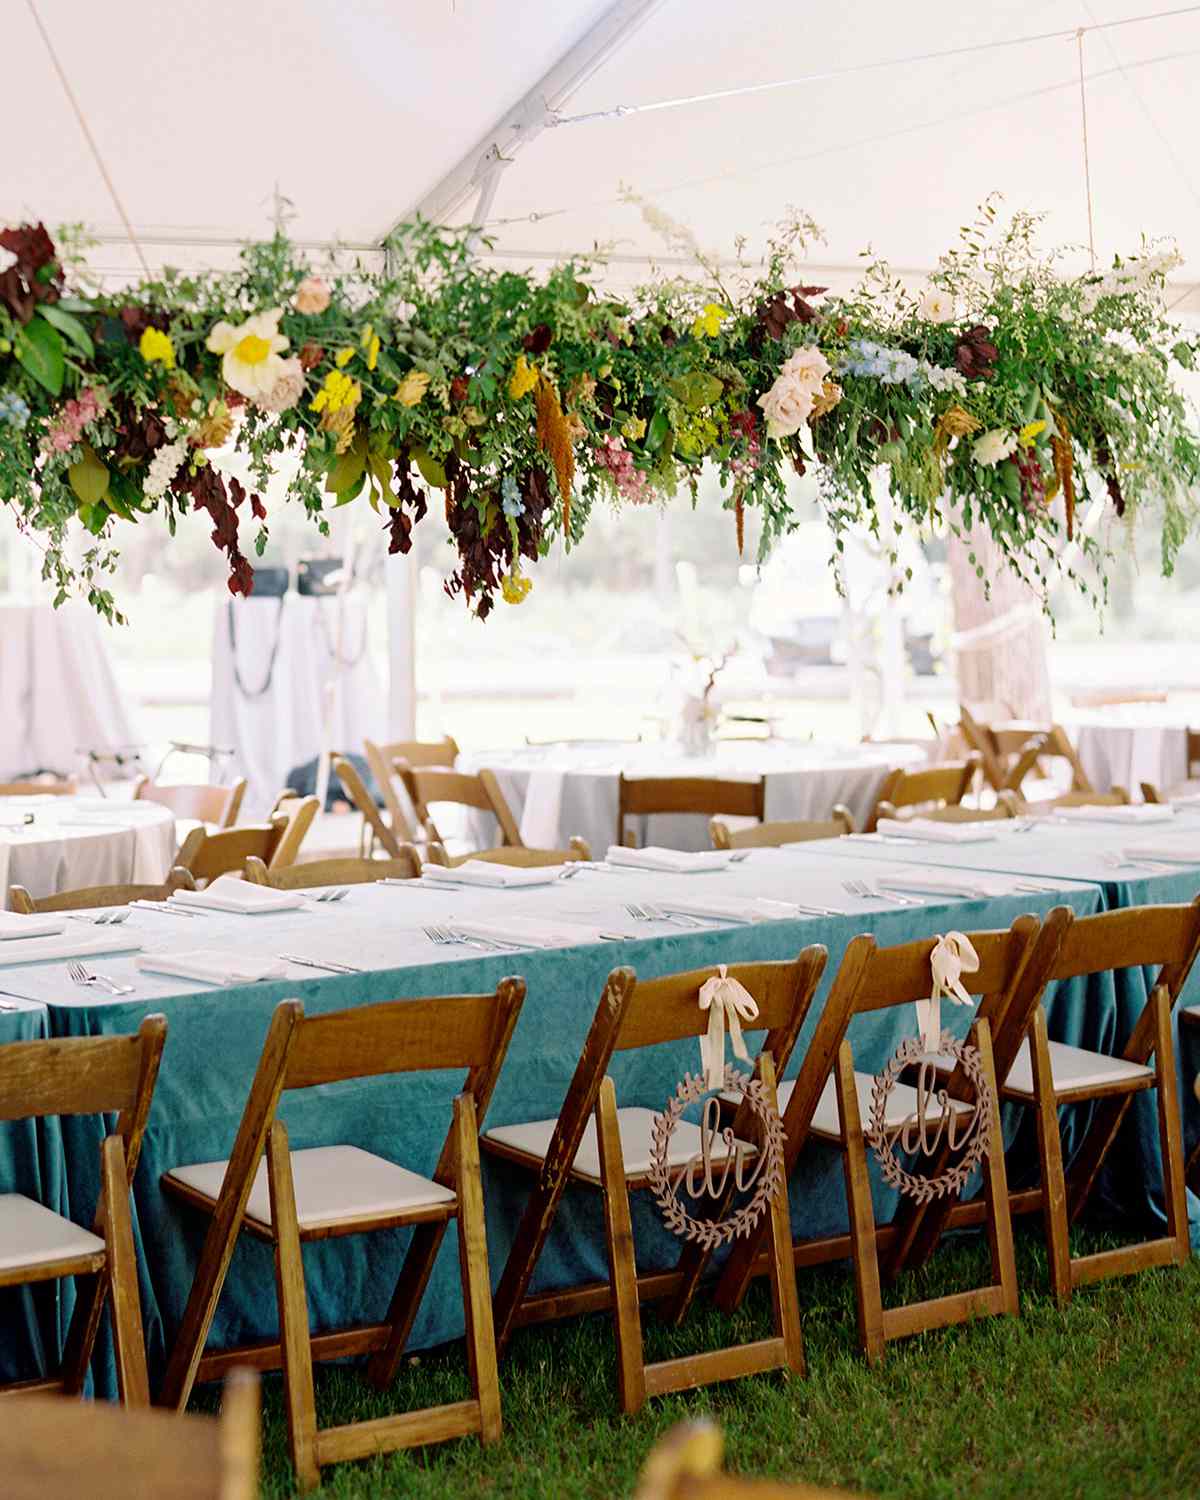 Picnic gazebo seating for wedding with folding chairs and long floral arrangement